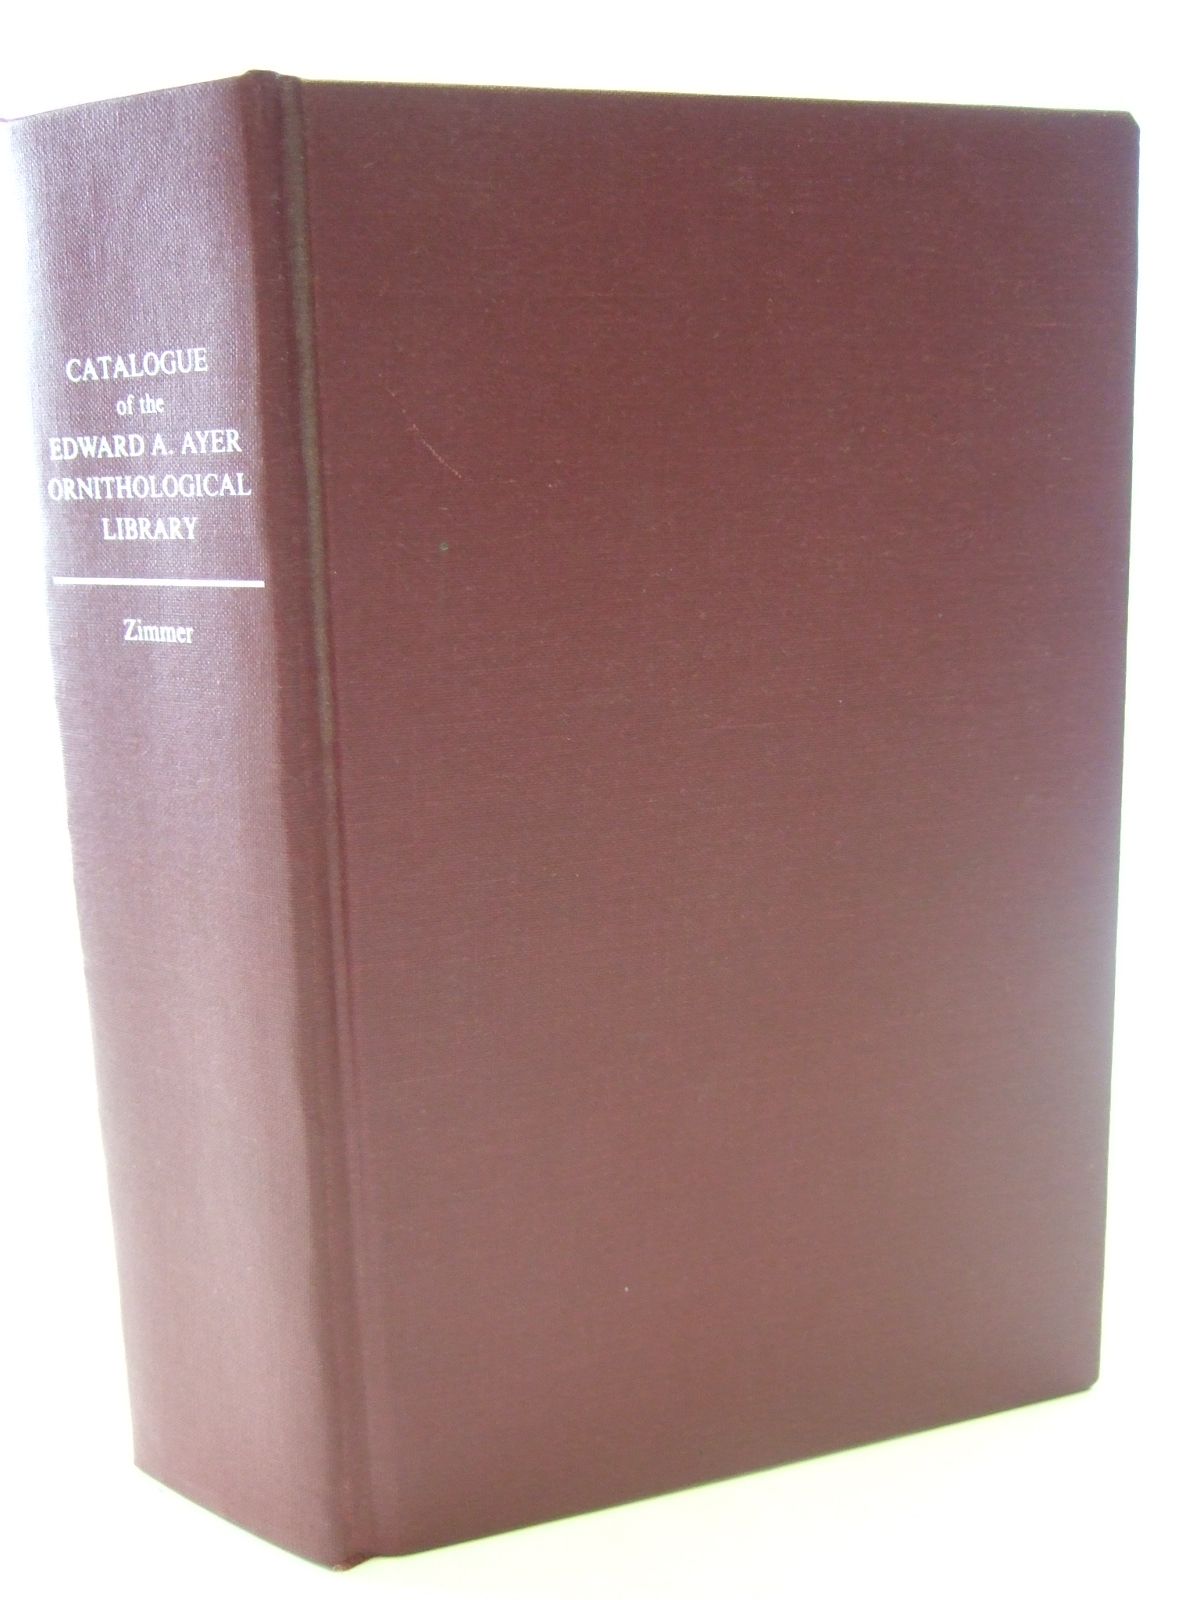 Photo of CATALOGUE OF THE EDWARD E. AYER ORNITHOLOGICAL LIBRARY written by Zimmer, John Todd published by Chicago (STOCK CODE: 1805117)  for sale by Stella & Rose's Books